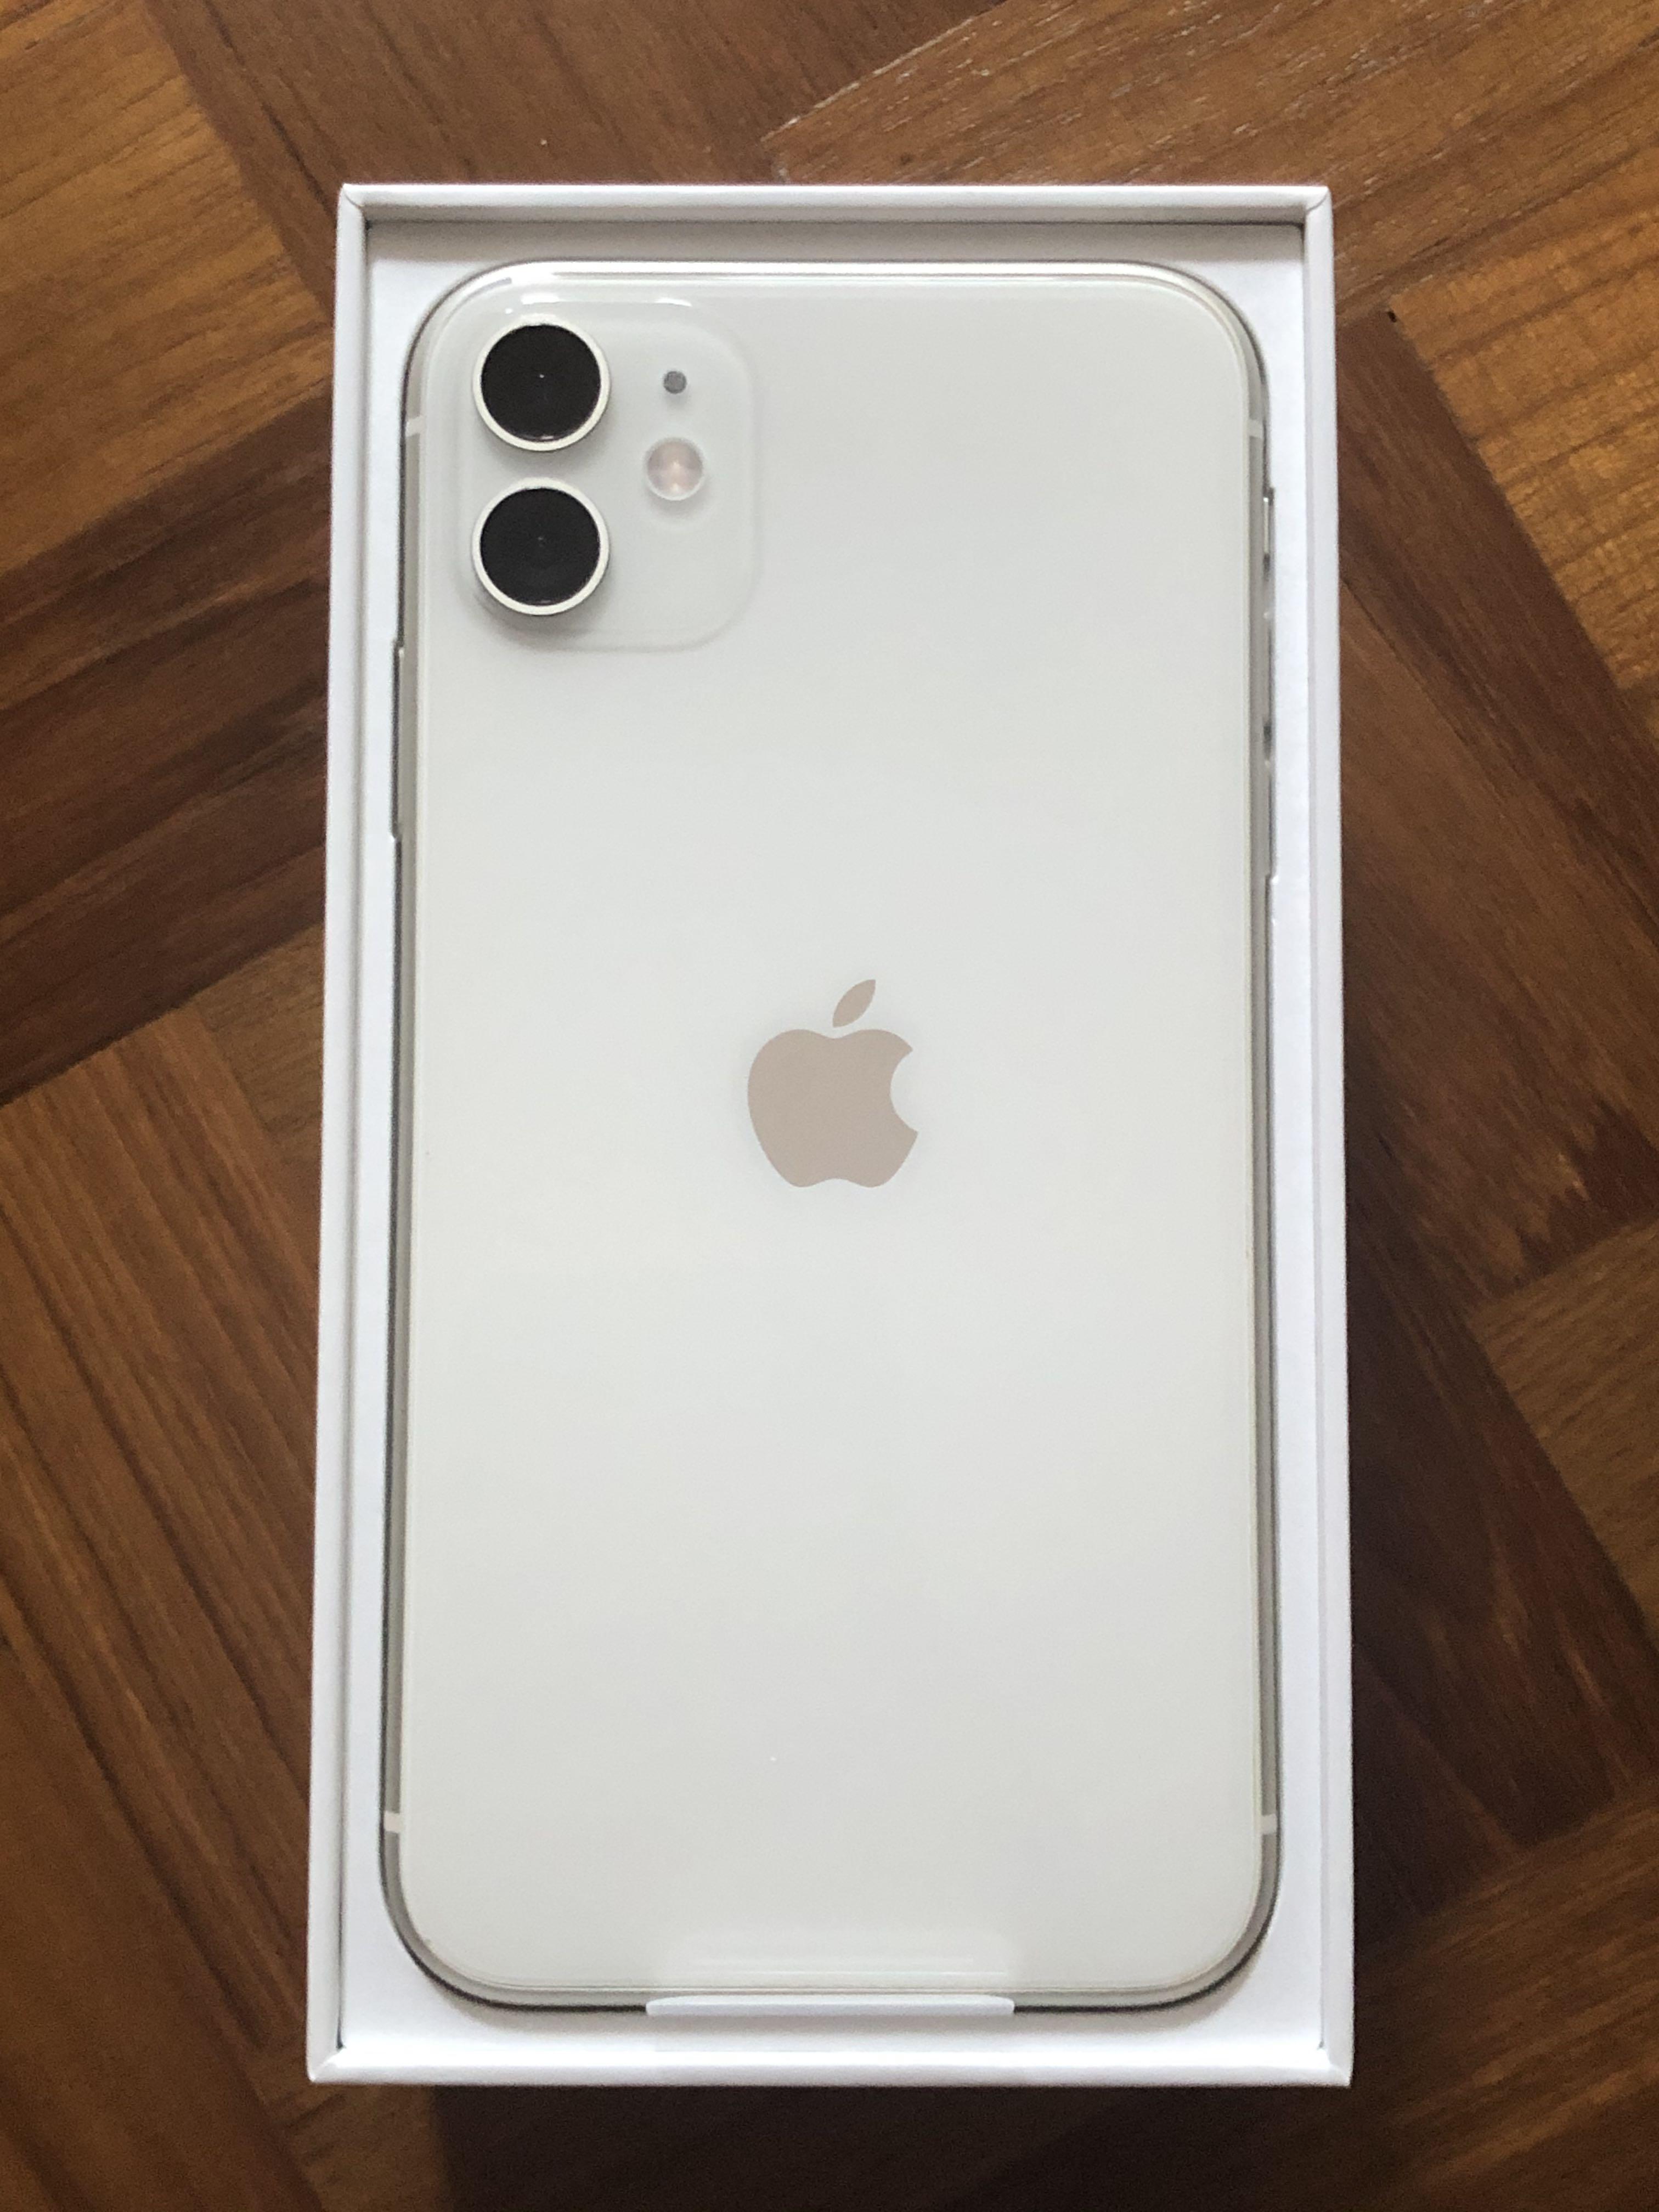 Iphone 11 128gb White Mobile Phones Gadgets Mobile Phones Iphone Iphone 11 Series On Carousell